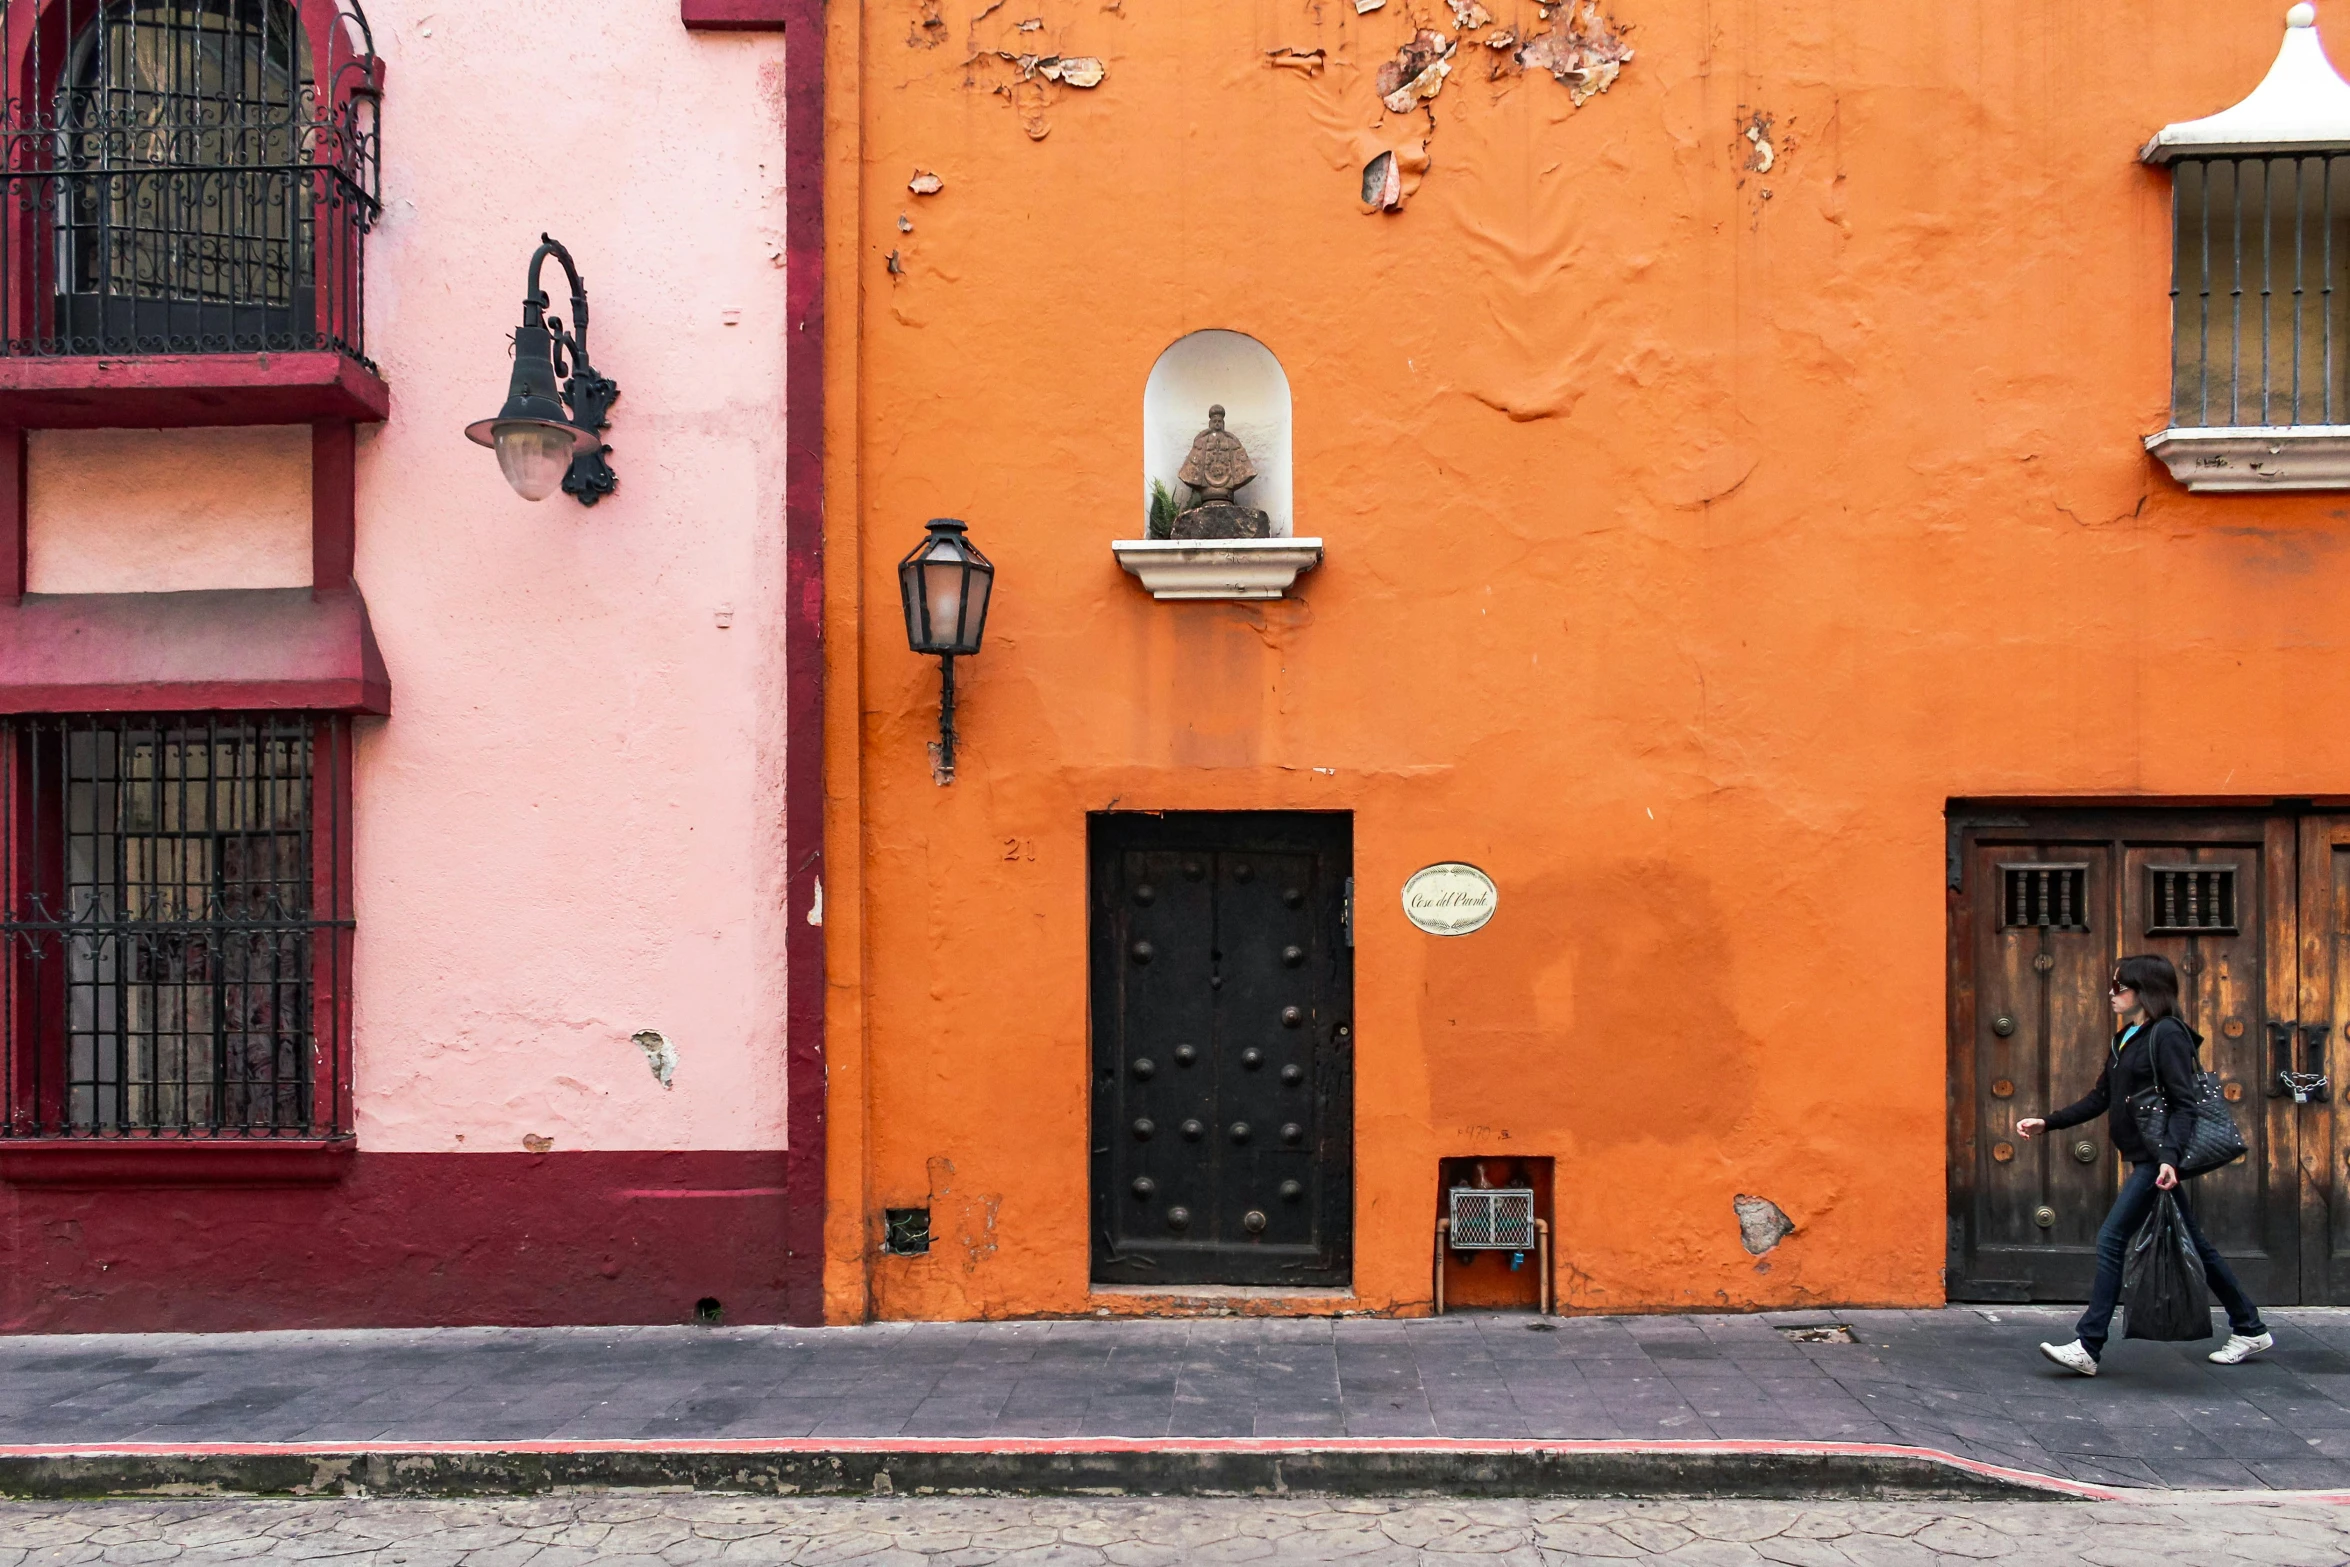 a person on a skateboard in front of a building, a photo, inspired by Agustín Fernández, pexels contest winner, orange color scheme, colonial era street, the walls are pink, downtown mexico